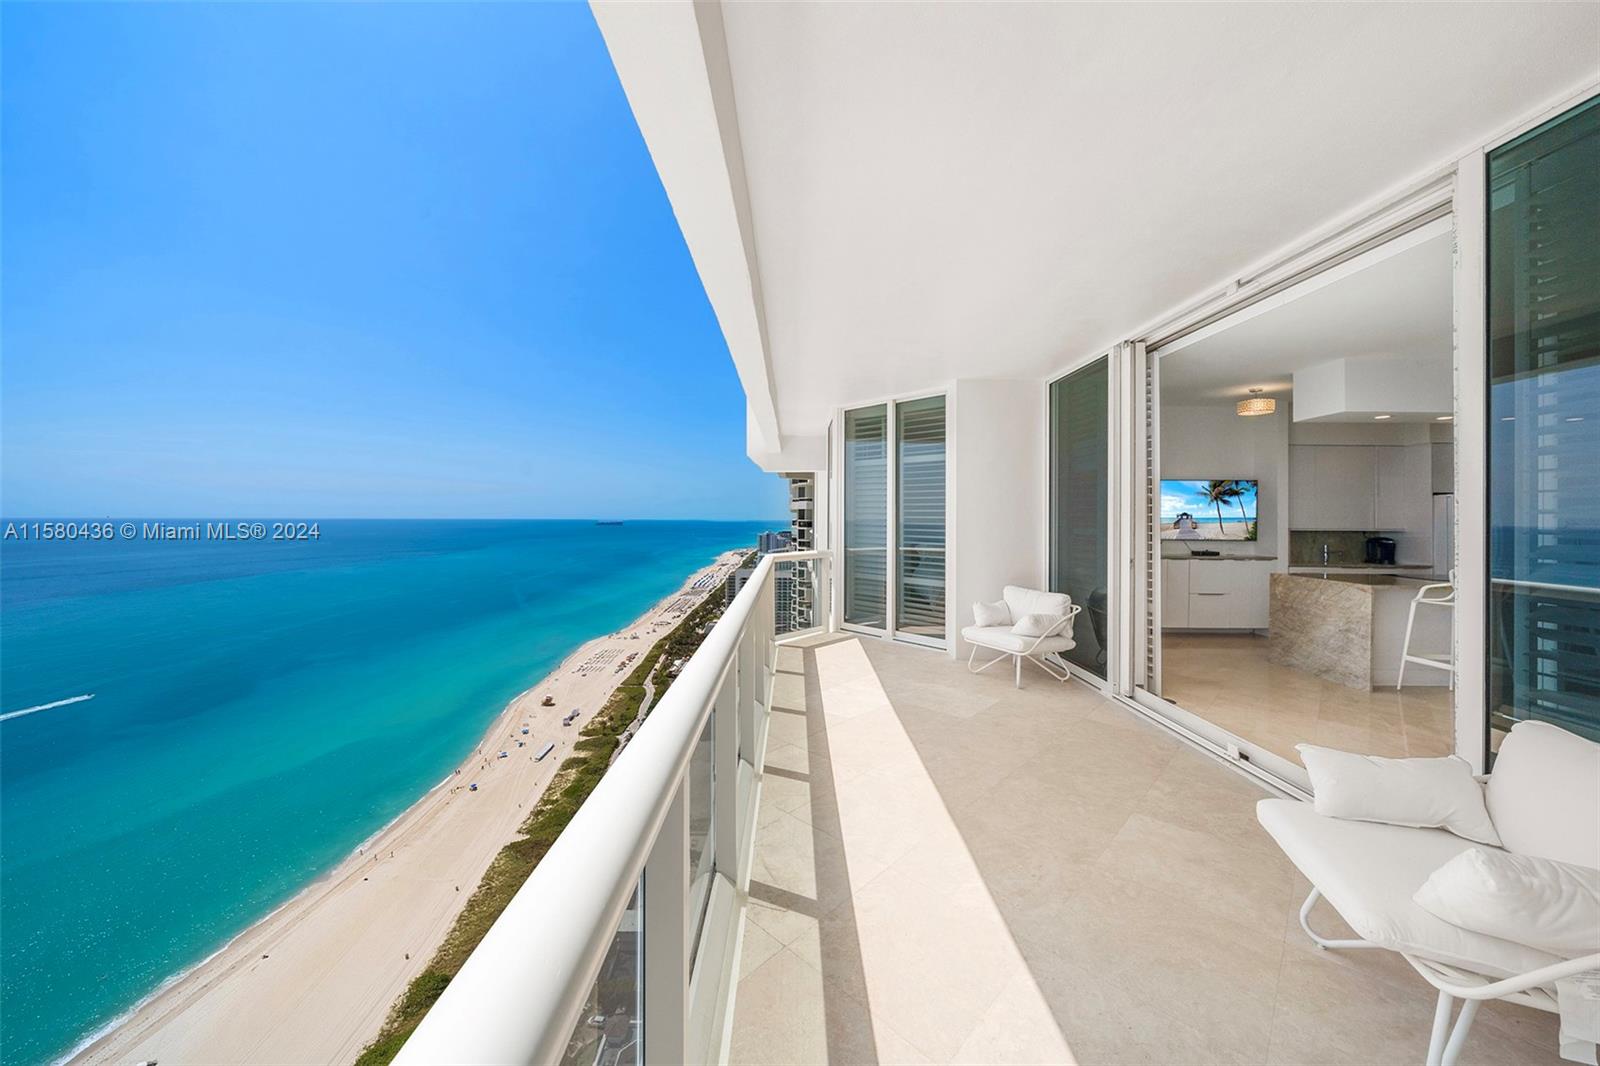 Escape to the epitome of luxury at this oceanfront 2-bedroom, 2-bath condo offering a slice of paradise in coveted Miami Beach. Featuring marble floors, 10 ft ceilings, floor-to-ceiling windows that flood the unit with natural sunlight, master bedroom with an en-suite bathroom, walk-in closet, and an expansive terrace balcony with breathtaking views of the beach, boardwalk, gorgeous pool and park grounds. The Blue Diamond offers 5-star resort like amenities and services including 24-hour security, valet, amazing pool with cascade, on-site restaurant, state of the art fitness center and more.